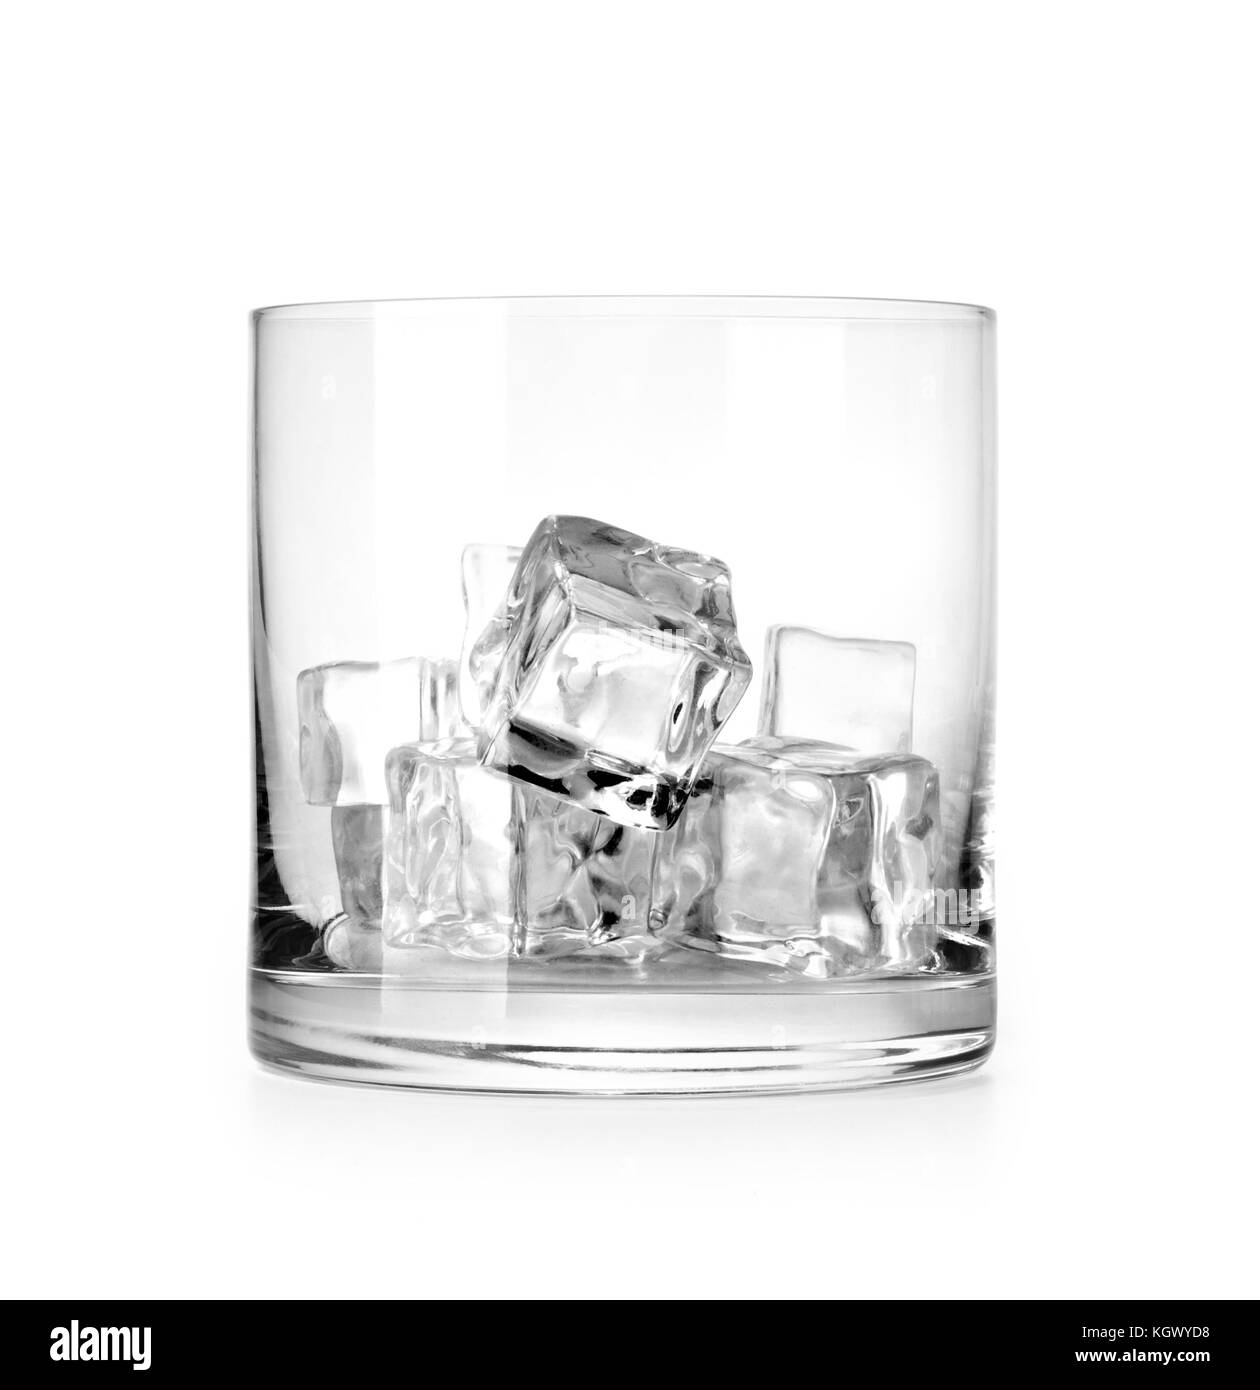 https://c8.alamy.com/comp/KGWYD8/glass-of-ice-cubes-isolated-on-white-background-with-clipping-path-KGWYD8.jpg